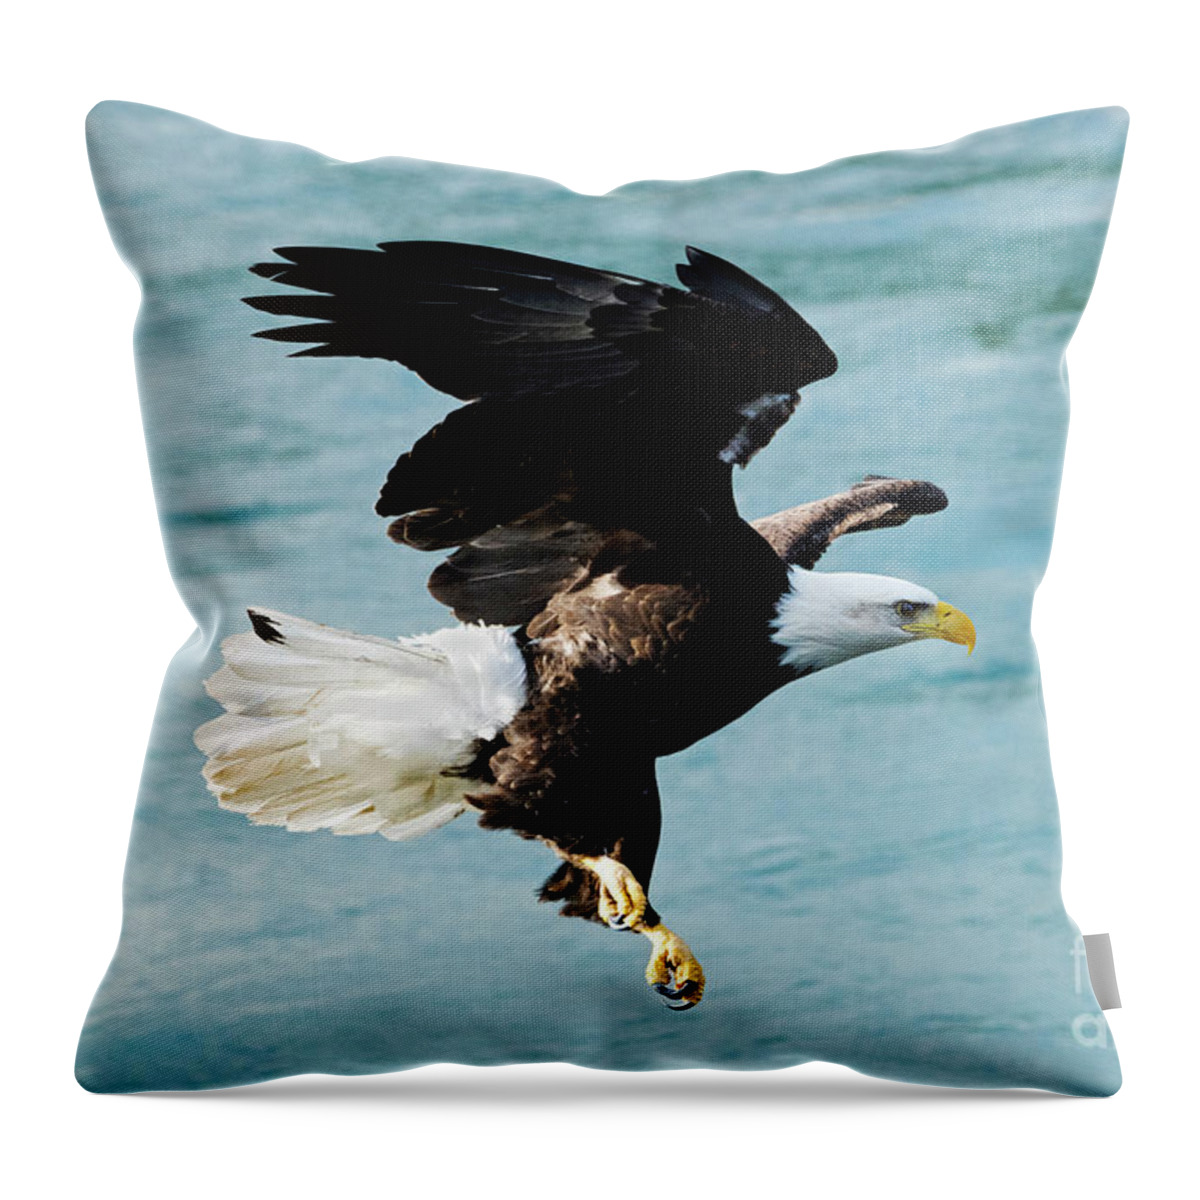 Focus Throw Pillow featuring the photograph Focused #3 by Michael Dawson